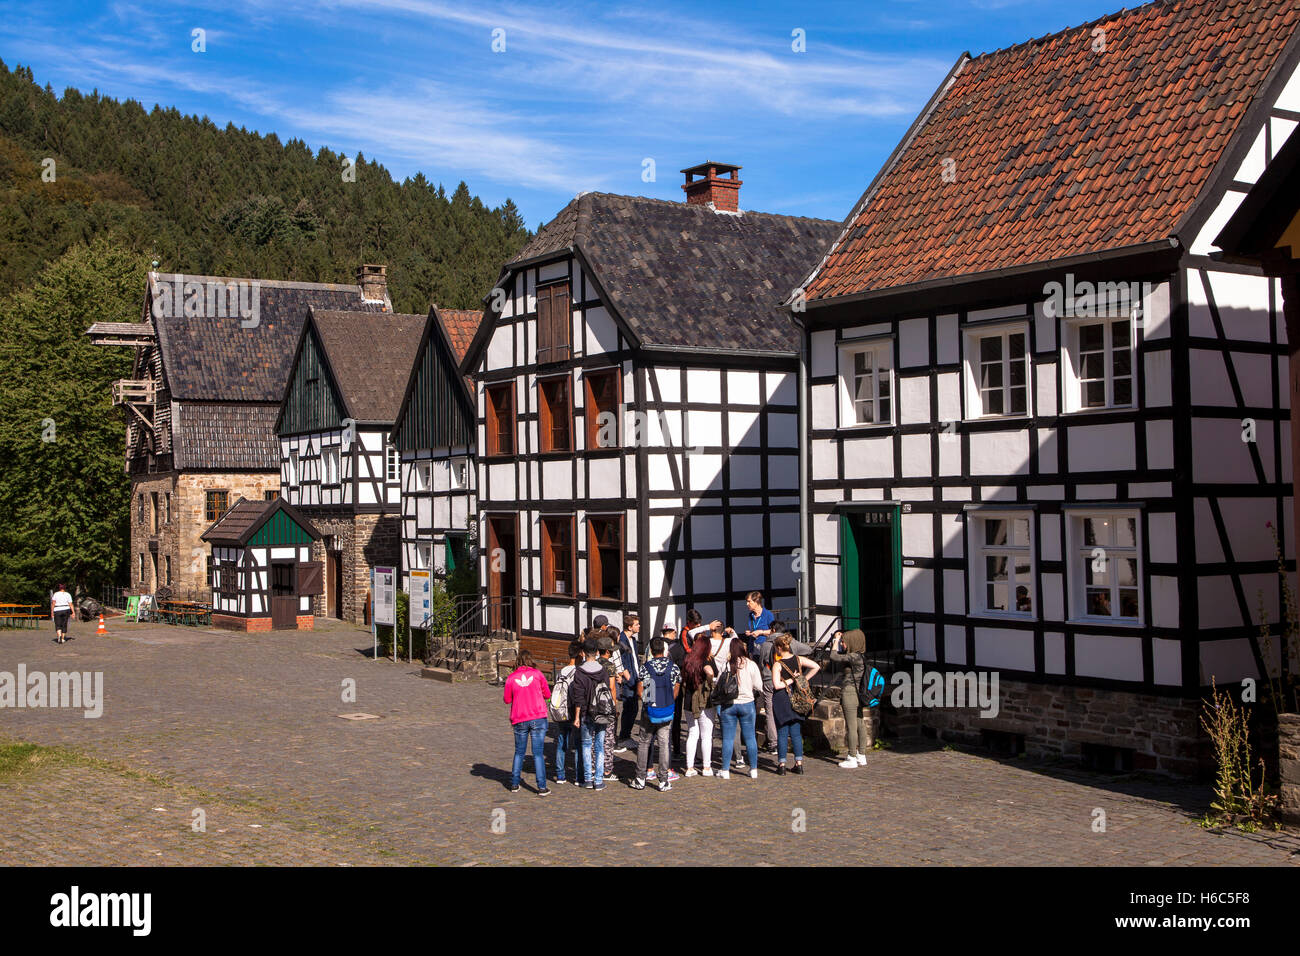 Europe, Germany, Hagen, Hagen Open-air Museum, half-timbered houses on the village square. Stock Photo